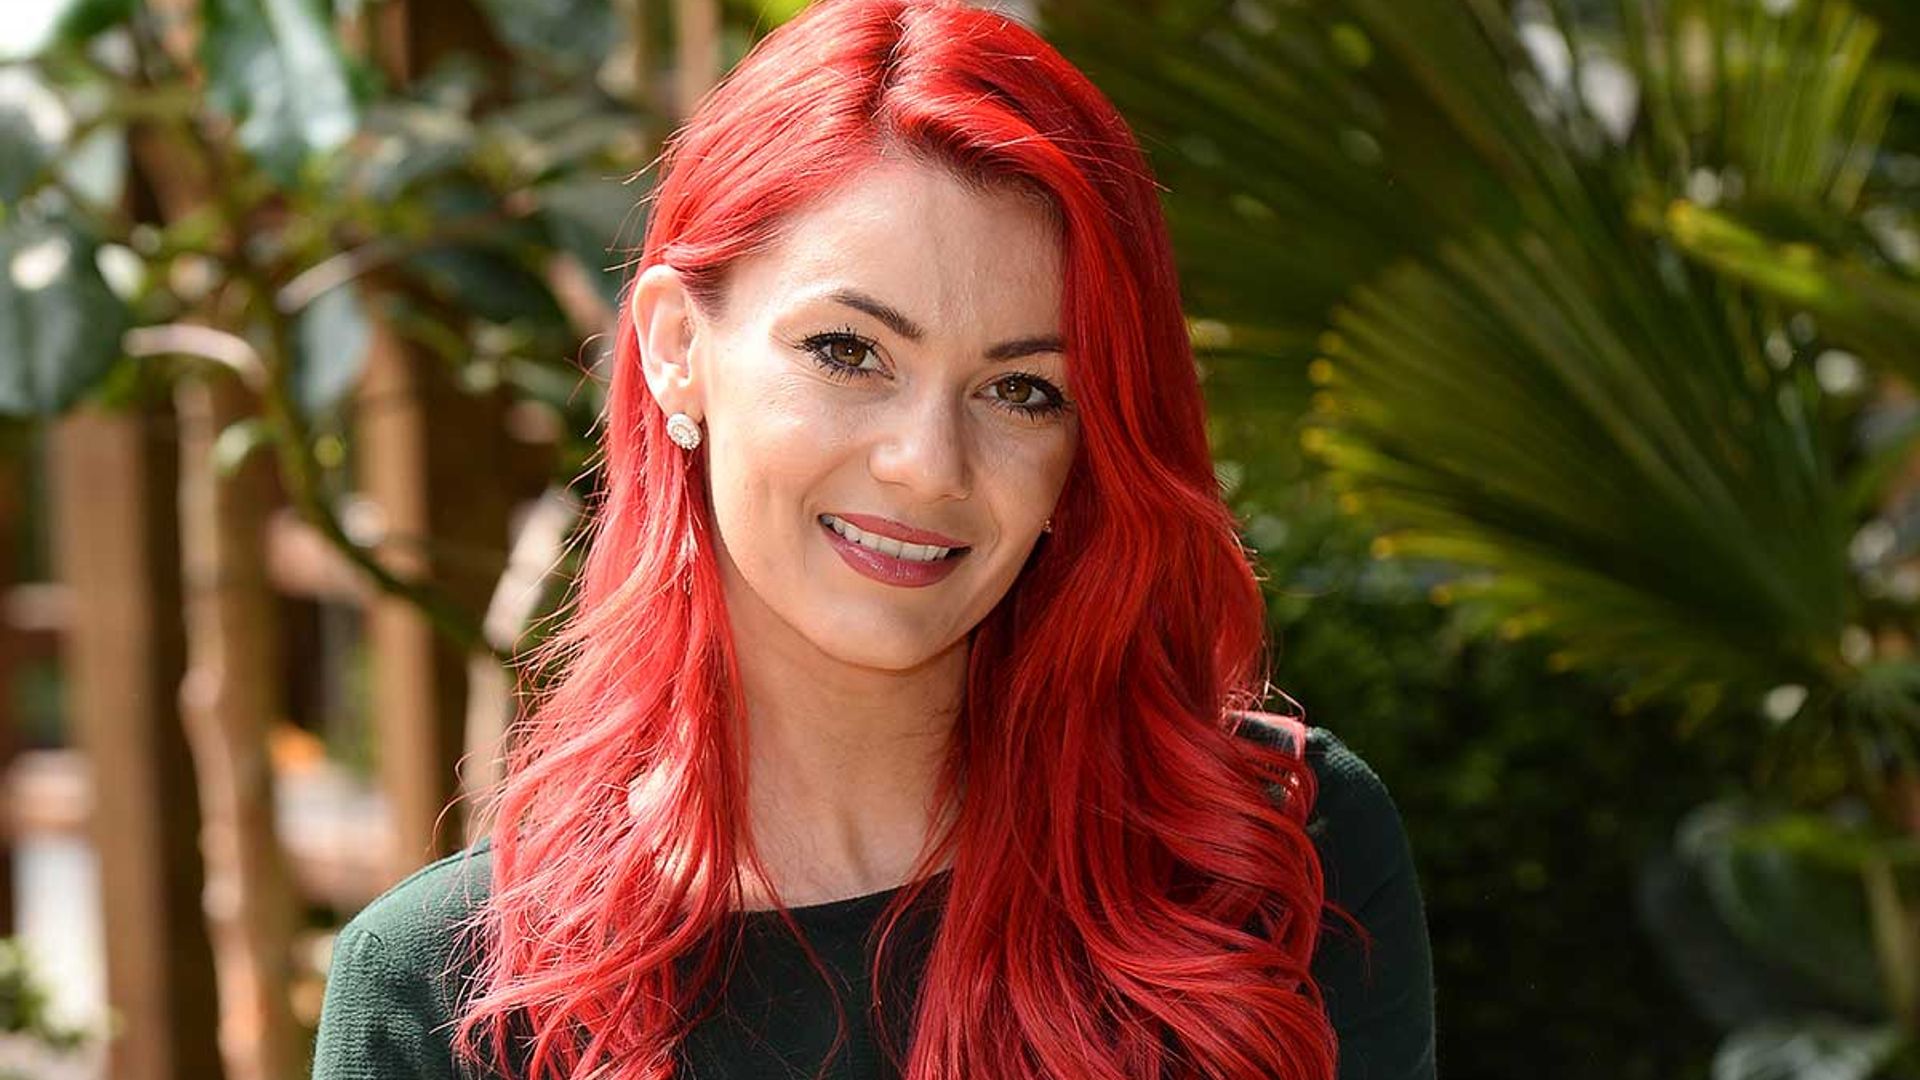 Strictly star Dianne Buswell wows with new hair look